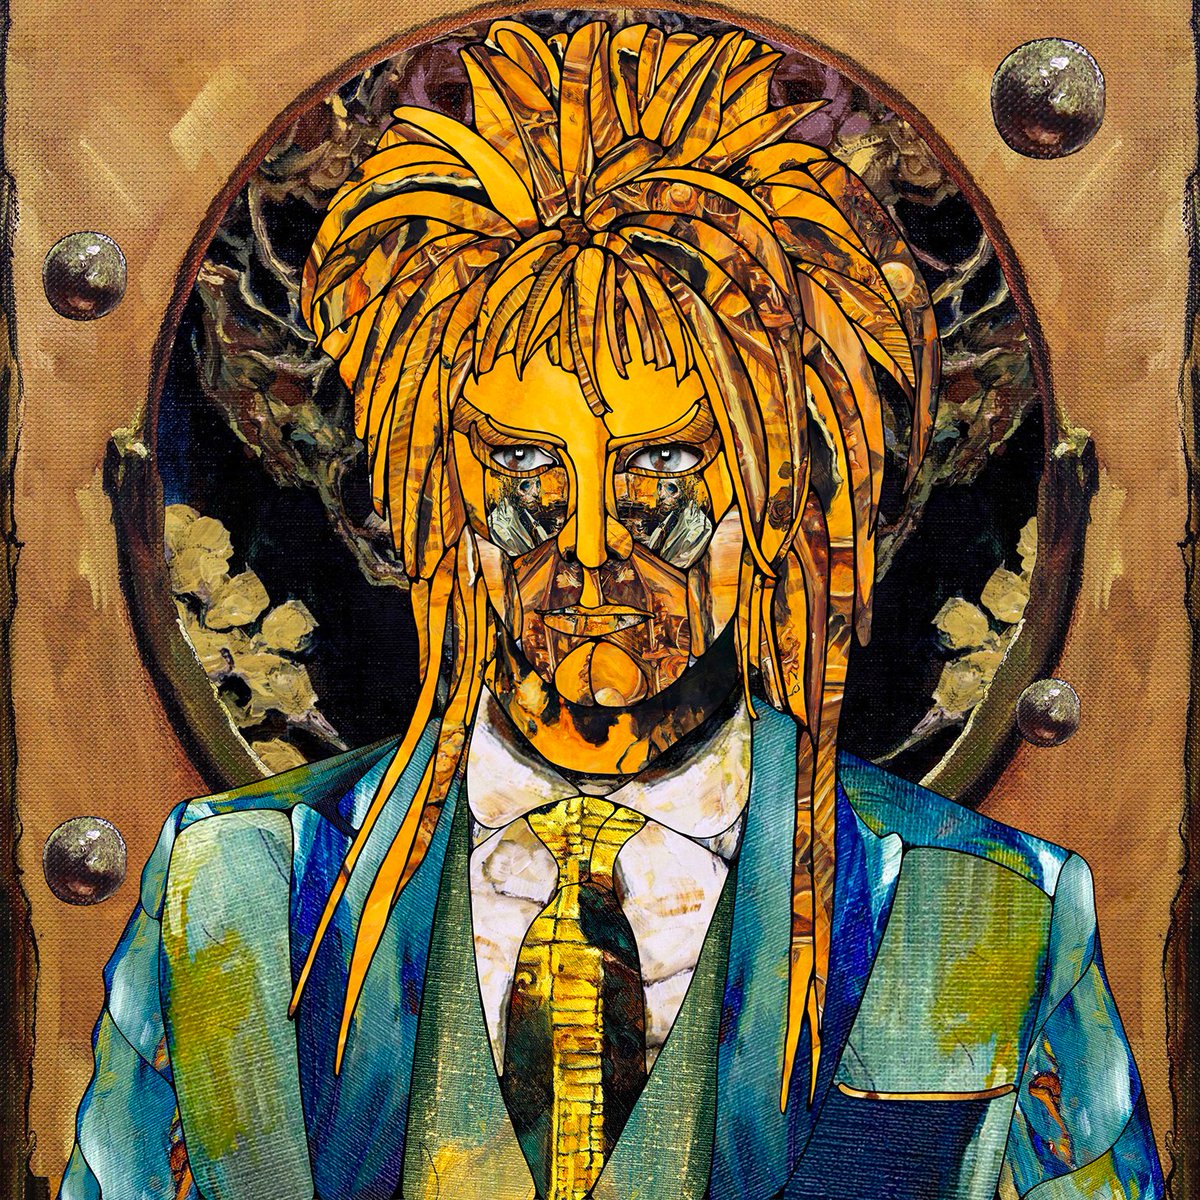 🟡Yellow King is now live on Cultishnya World of @CultCryptoArt 🔺 🤝A @andresdelvecc X GeorgeBoya collaboration 💎Unique edition on @foundation 🧐0.40Ξ Reserve price and 24h auction 🕵️‍♂️🕵️‍♂️Partners in Crime series 🖌️Oil Painting X Digital Collage✂️ 🔗Link below👇